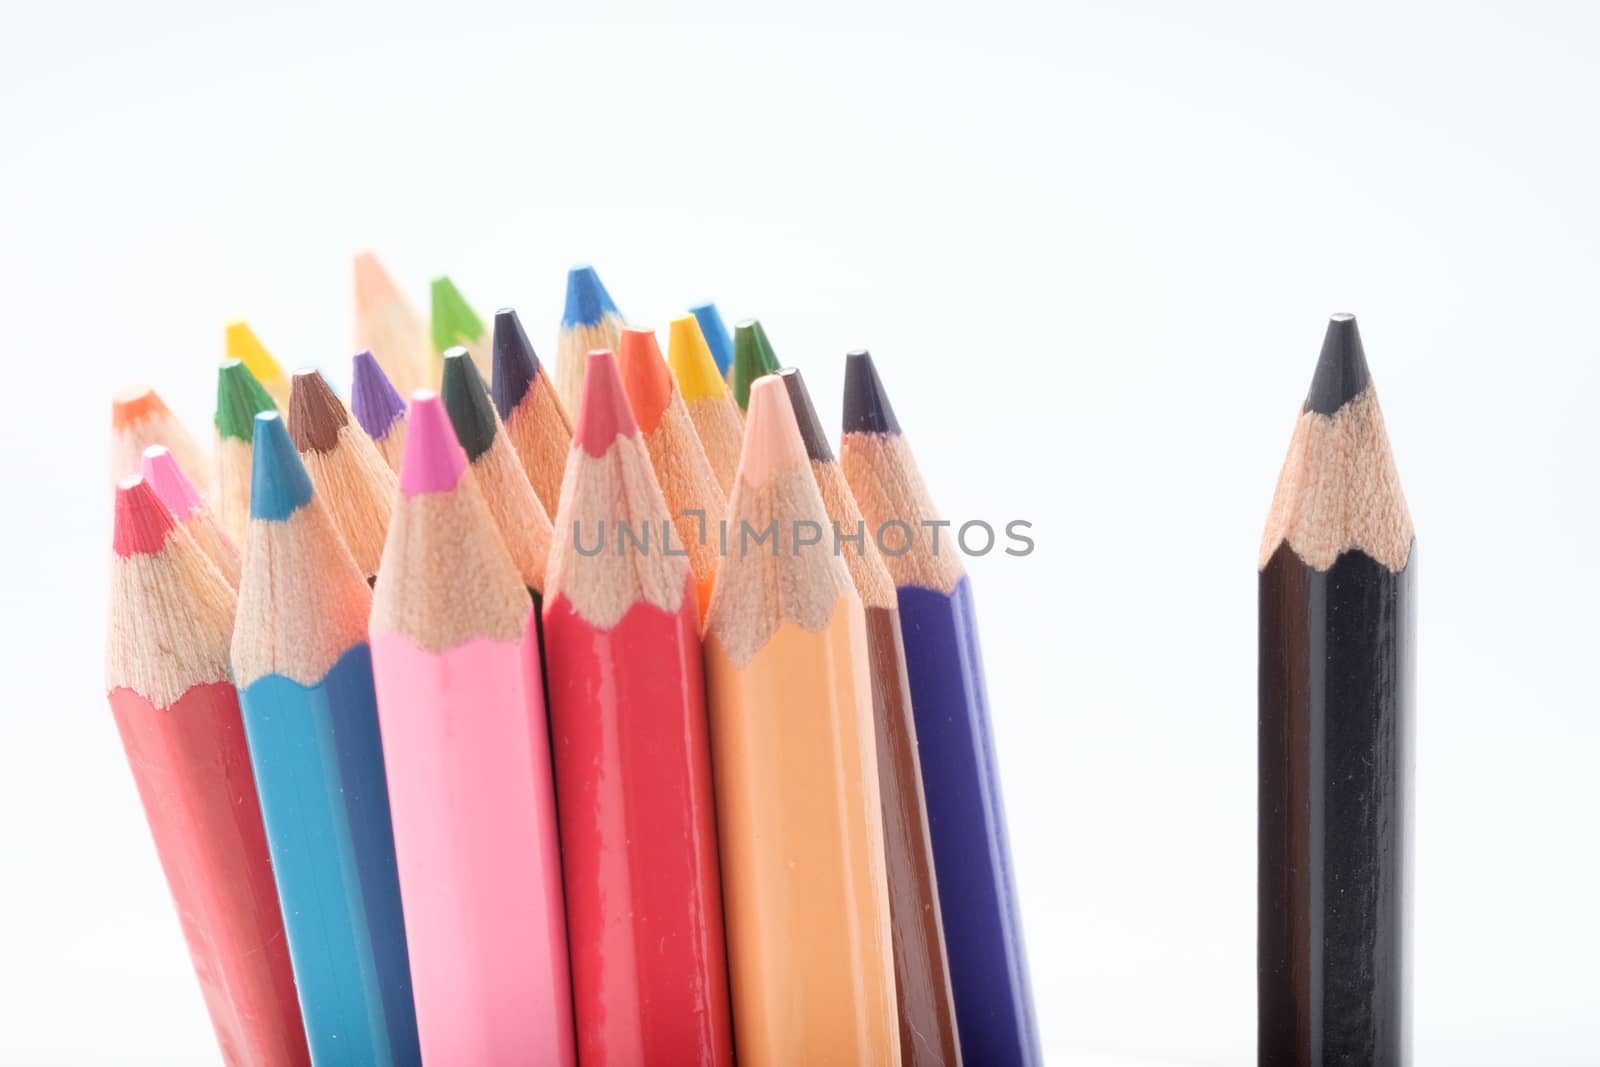 Colored pencils on white background by zneb076